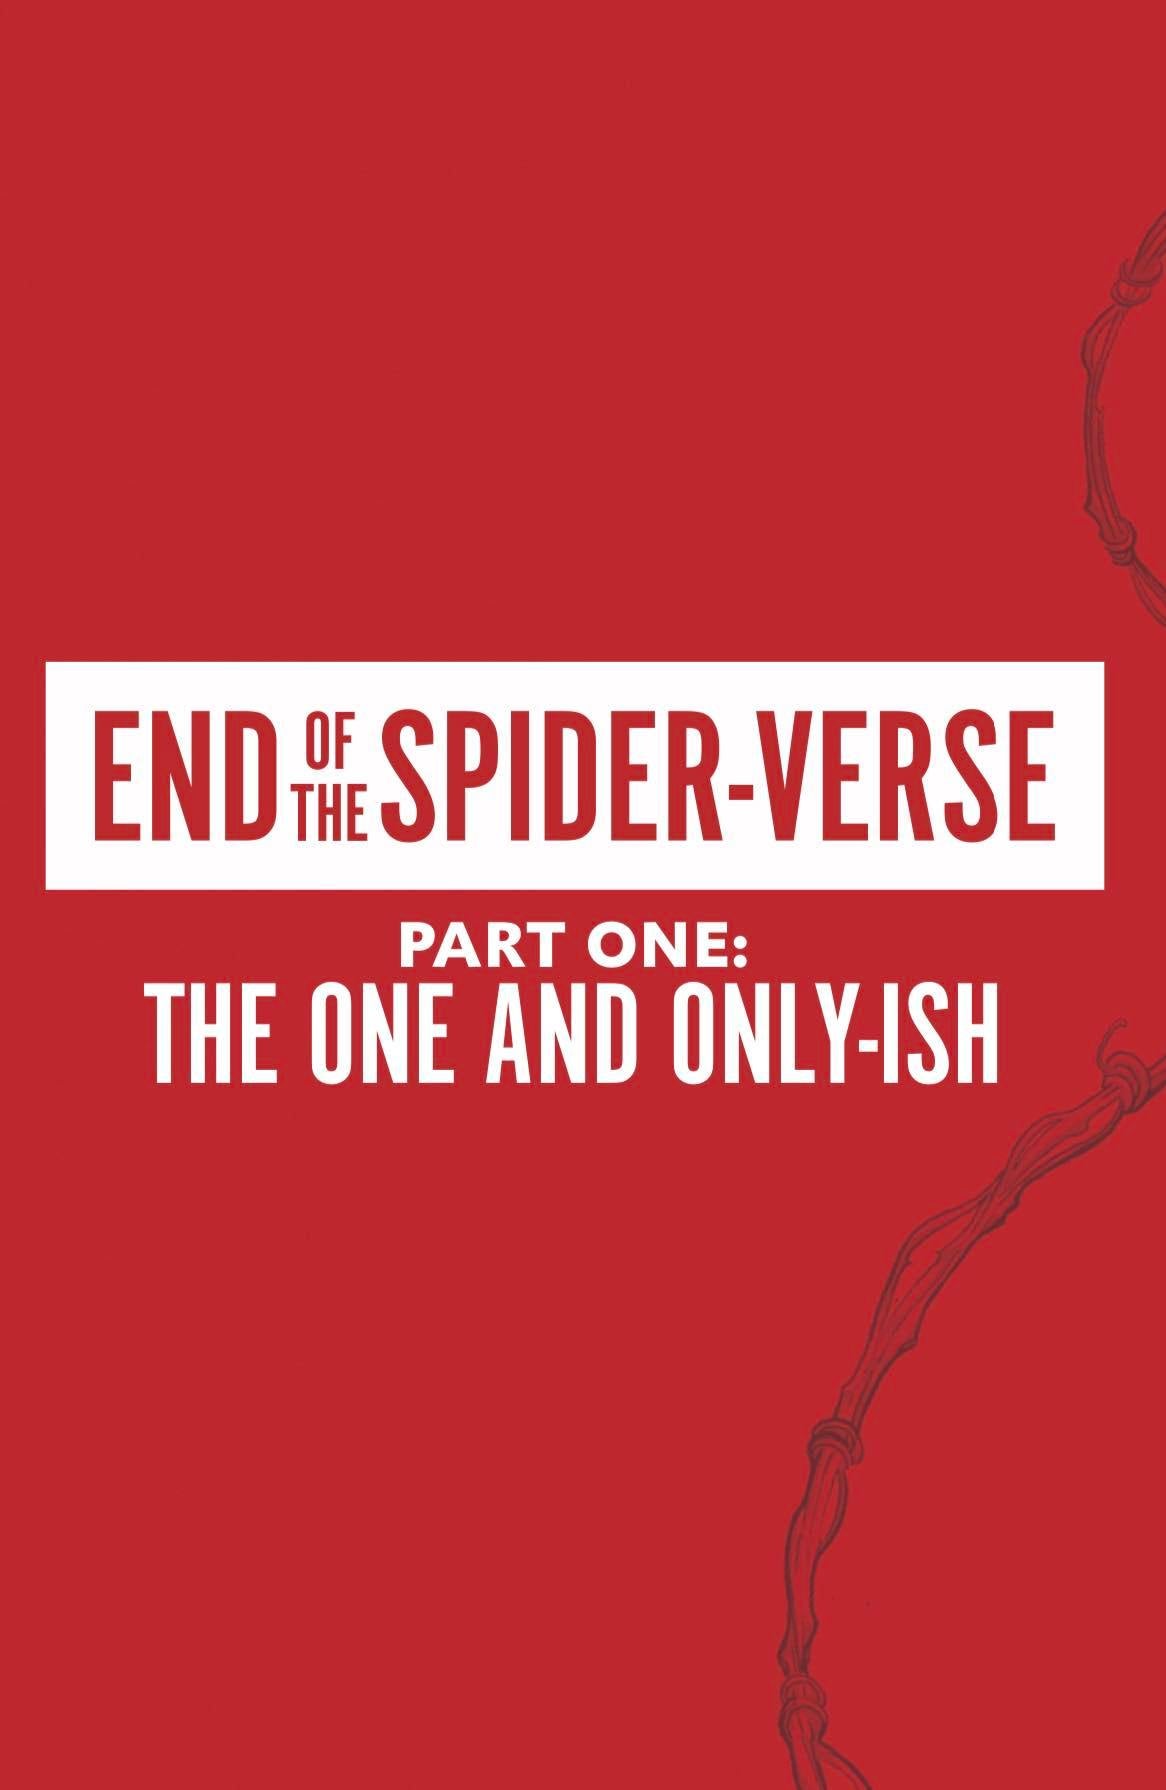 End of the Spider-Verse title card